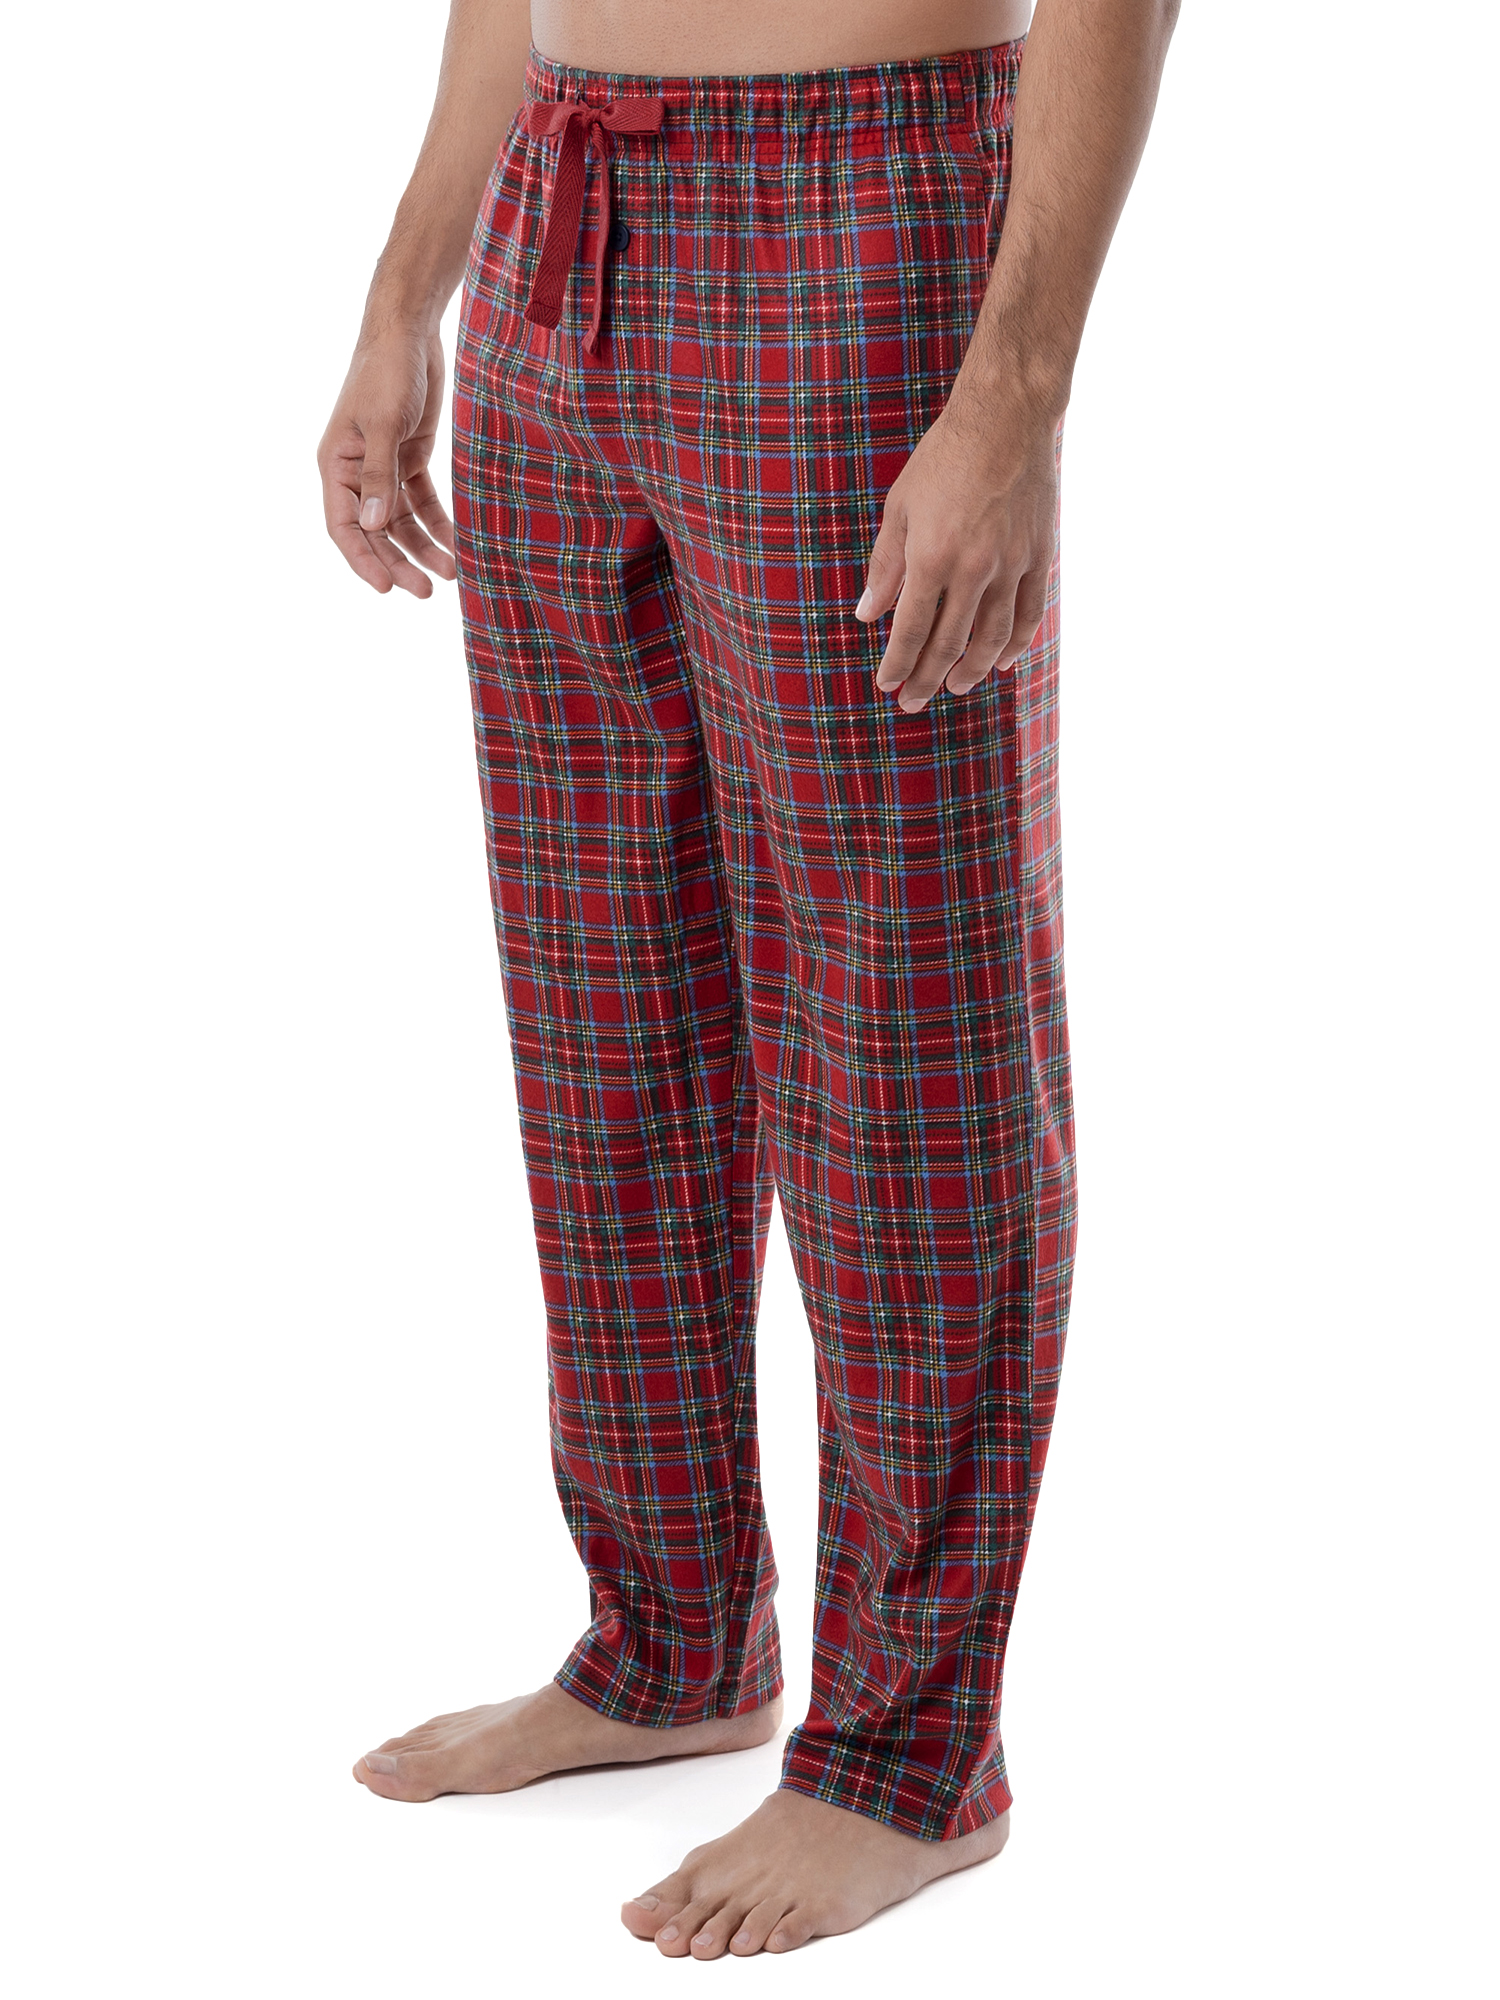 Fruit of the Loom Men's Holiday and Plaid Print Soft Microfleece Pajama Pant 2-Pack Bundle - image 9 of 15